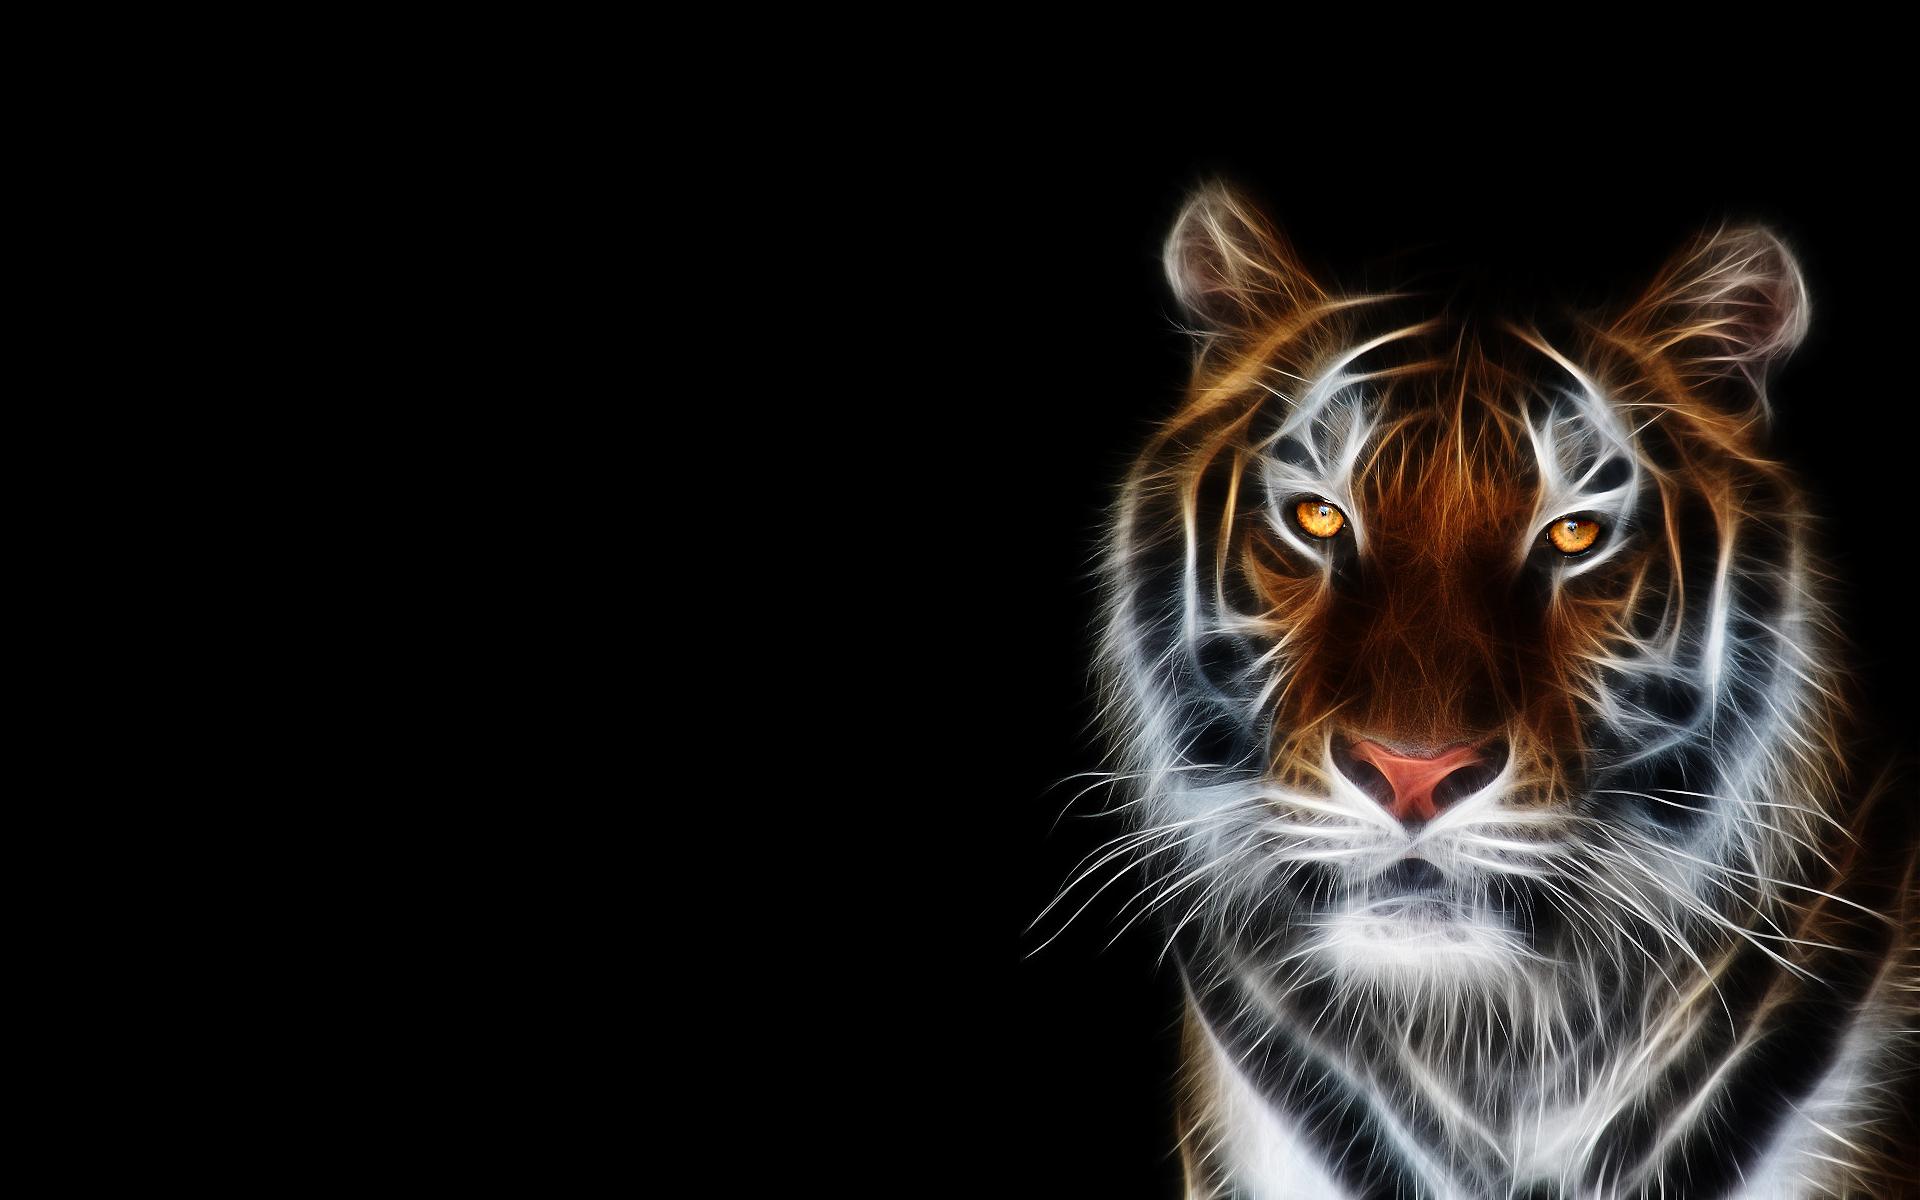 COOL TIGER wallpaper by hende09  Download on ZEDGE  8517